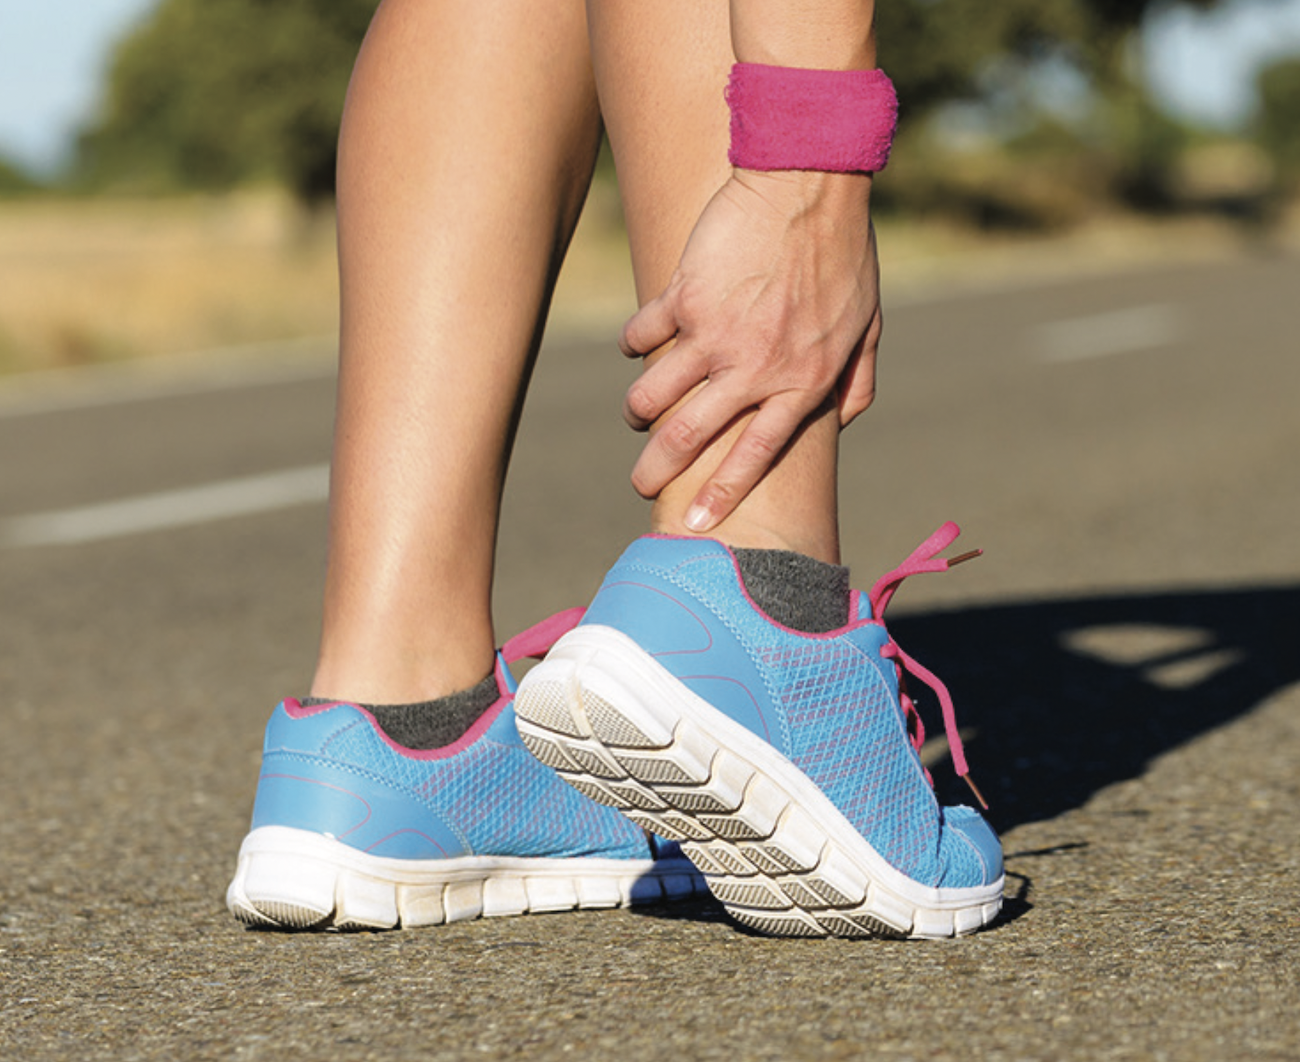 achilles-tendinopathy-overview-causes-symptoms-treatments